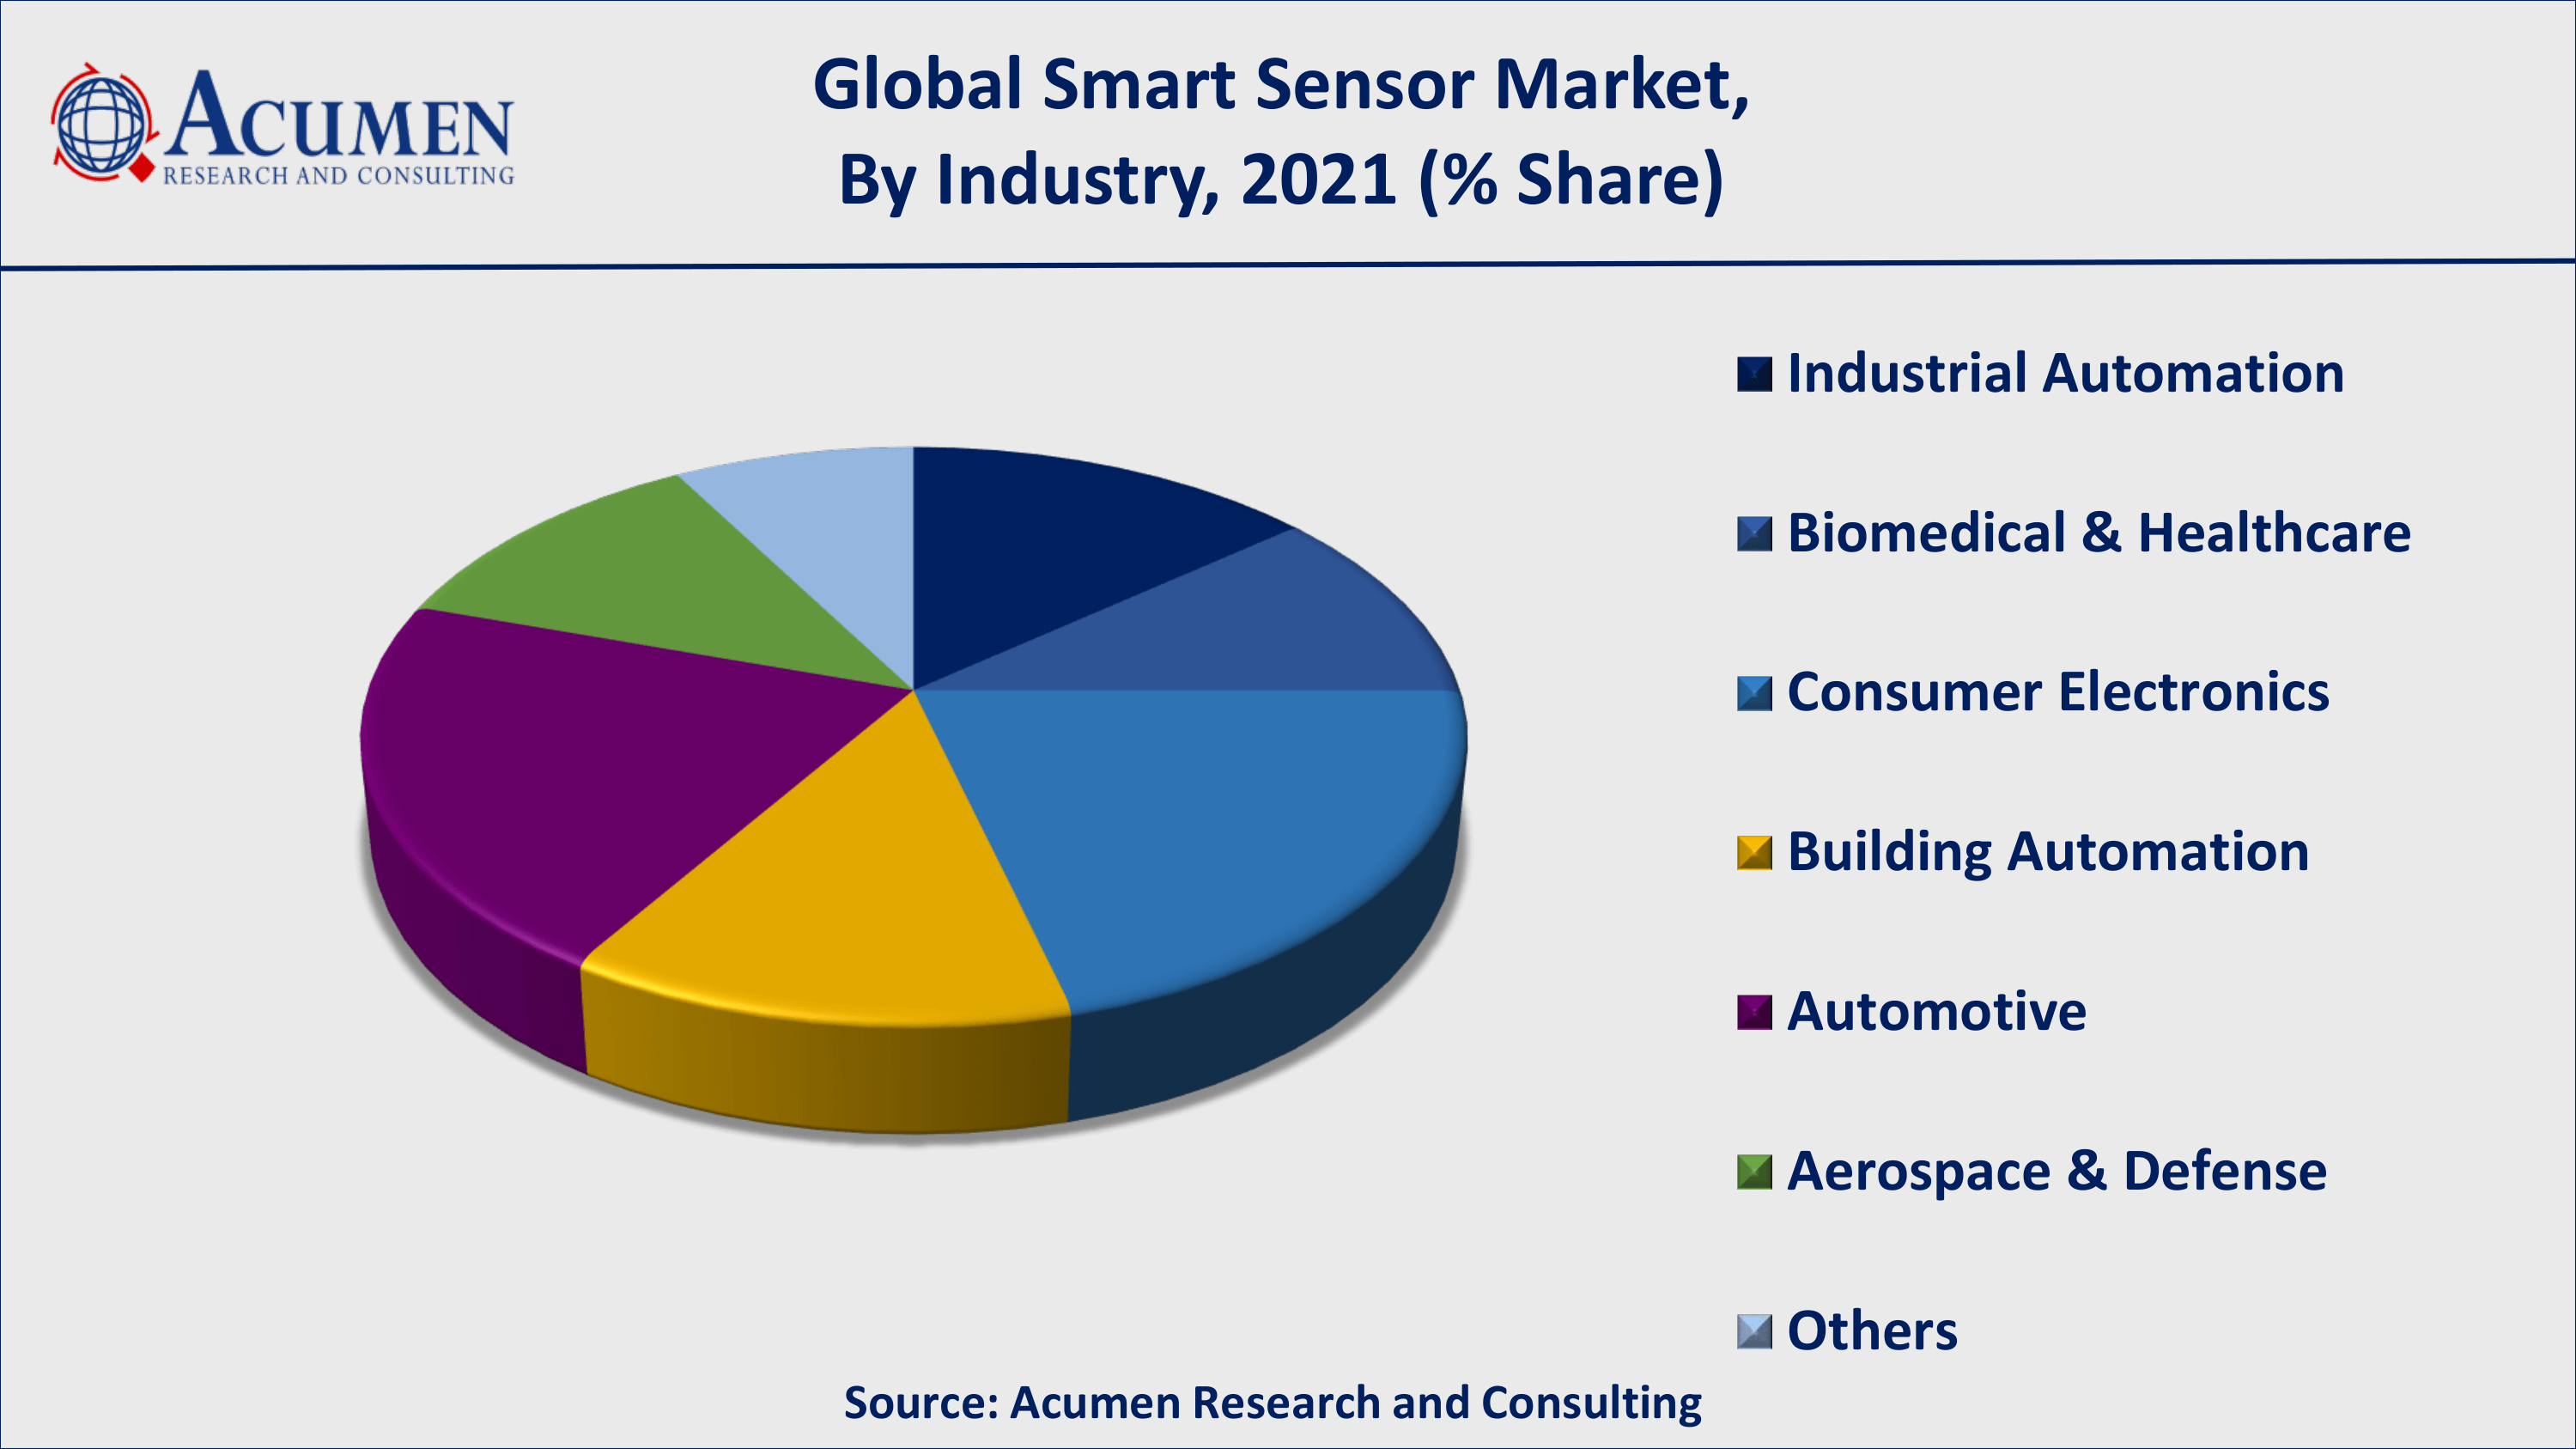 Increasing demand for smart sensors in IoT-based devices will fuel the global smart sensor market value